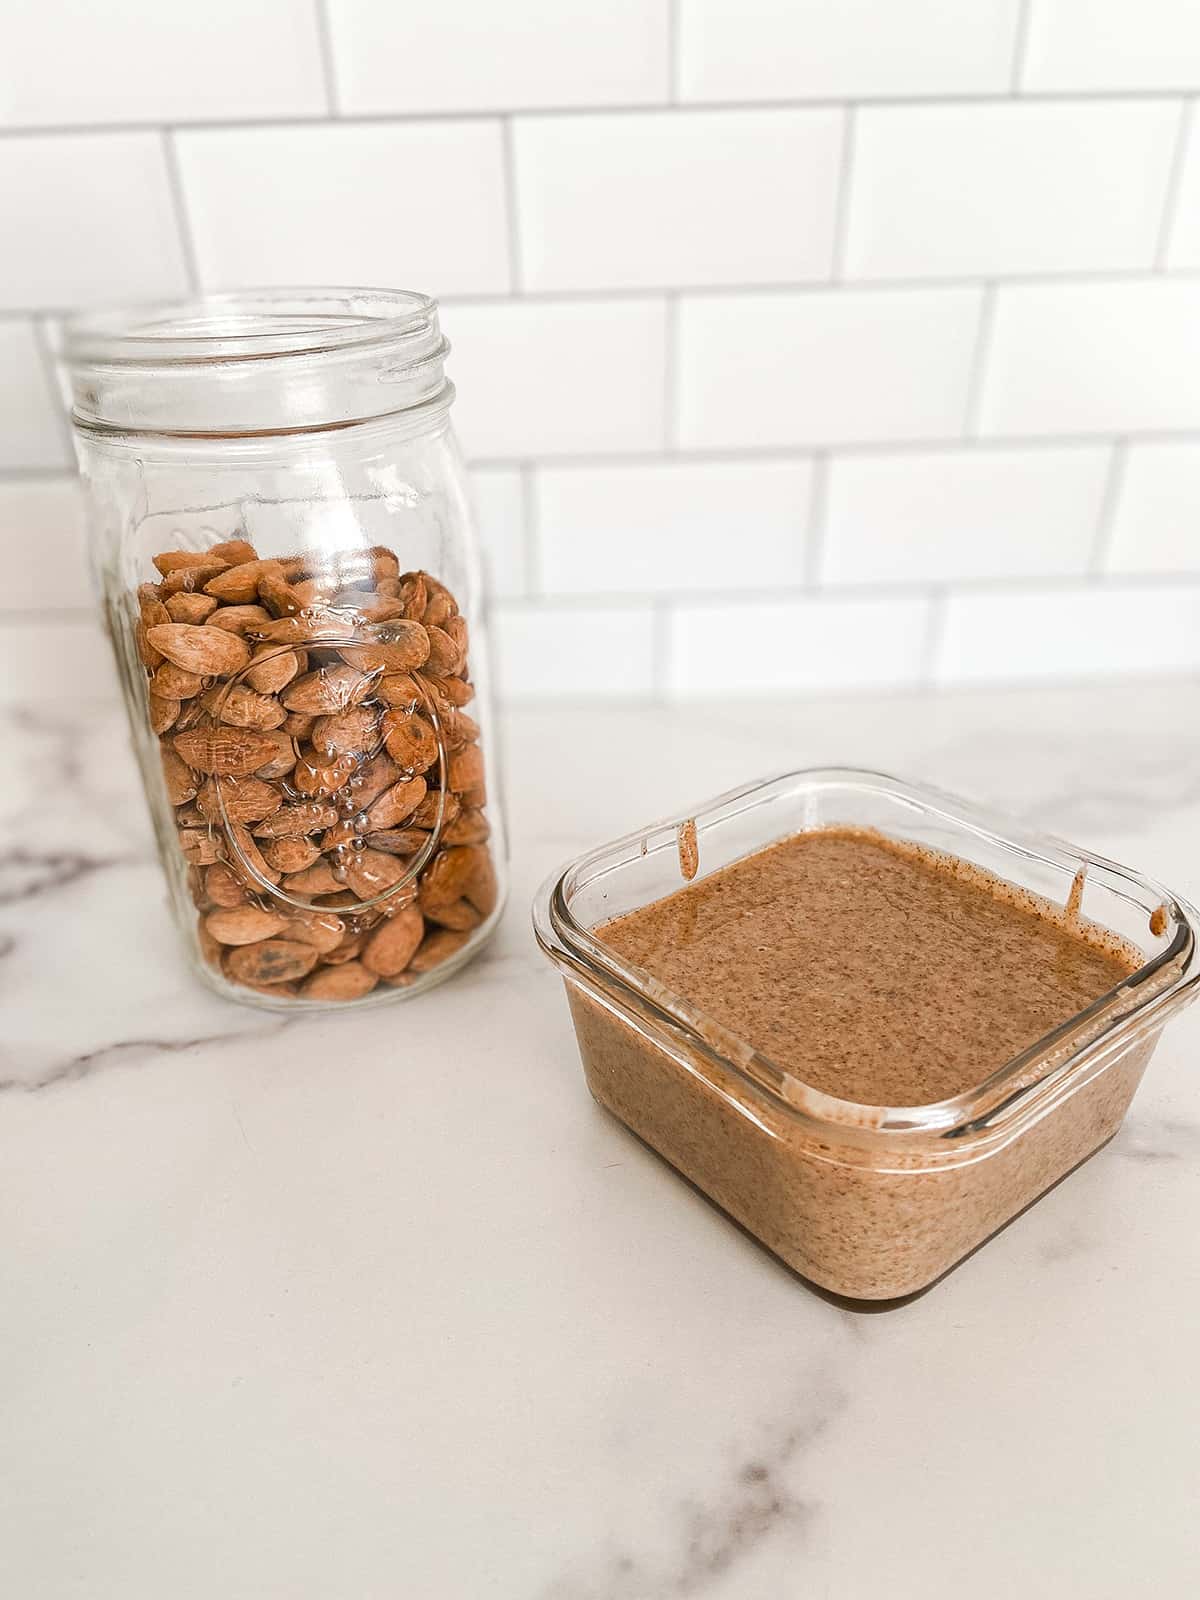 How to make fermented nut butter